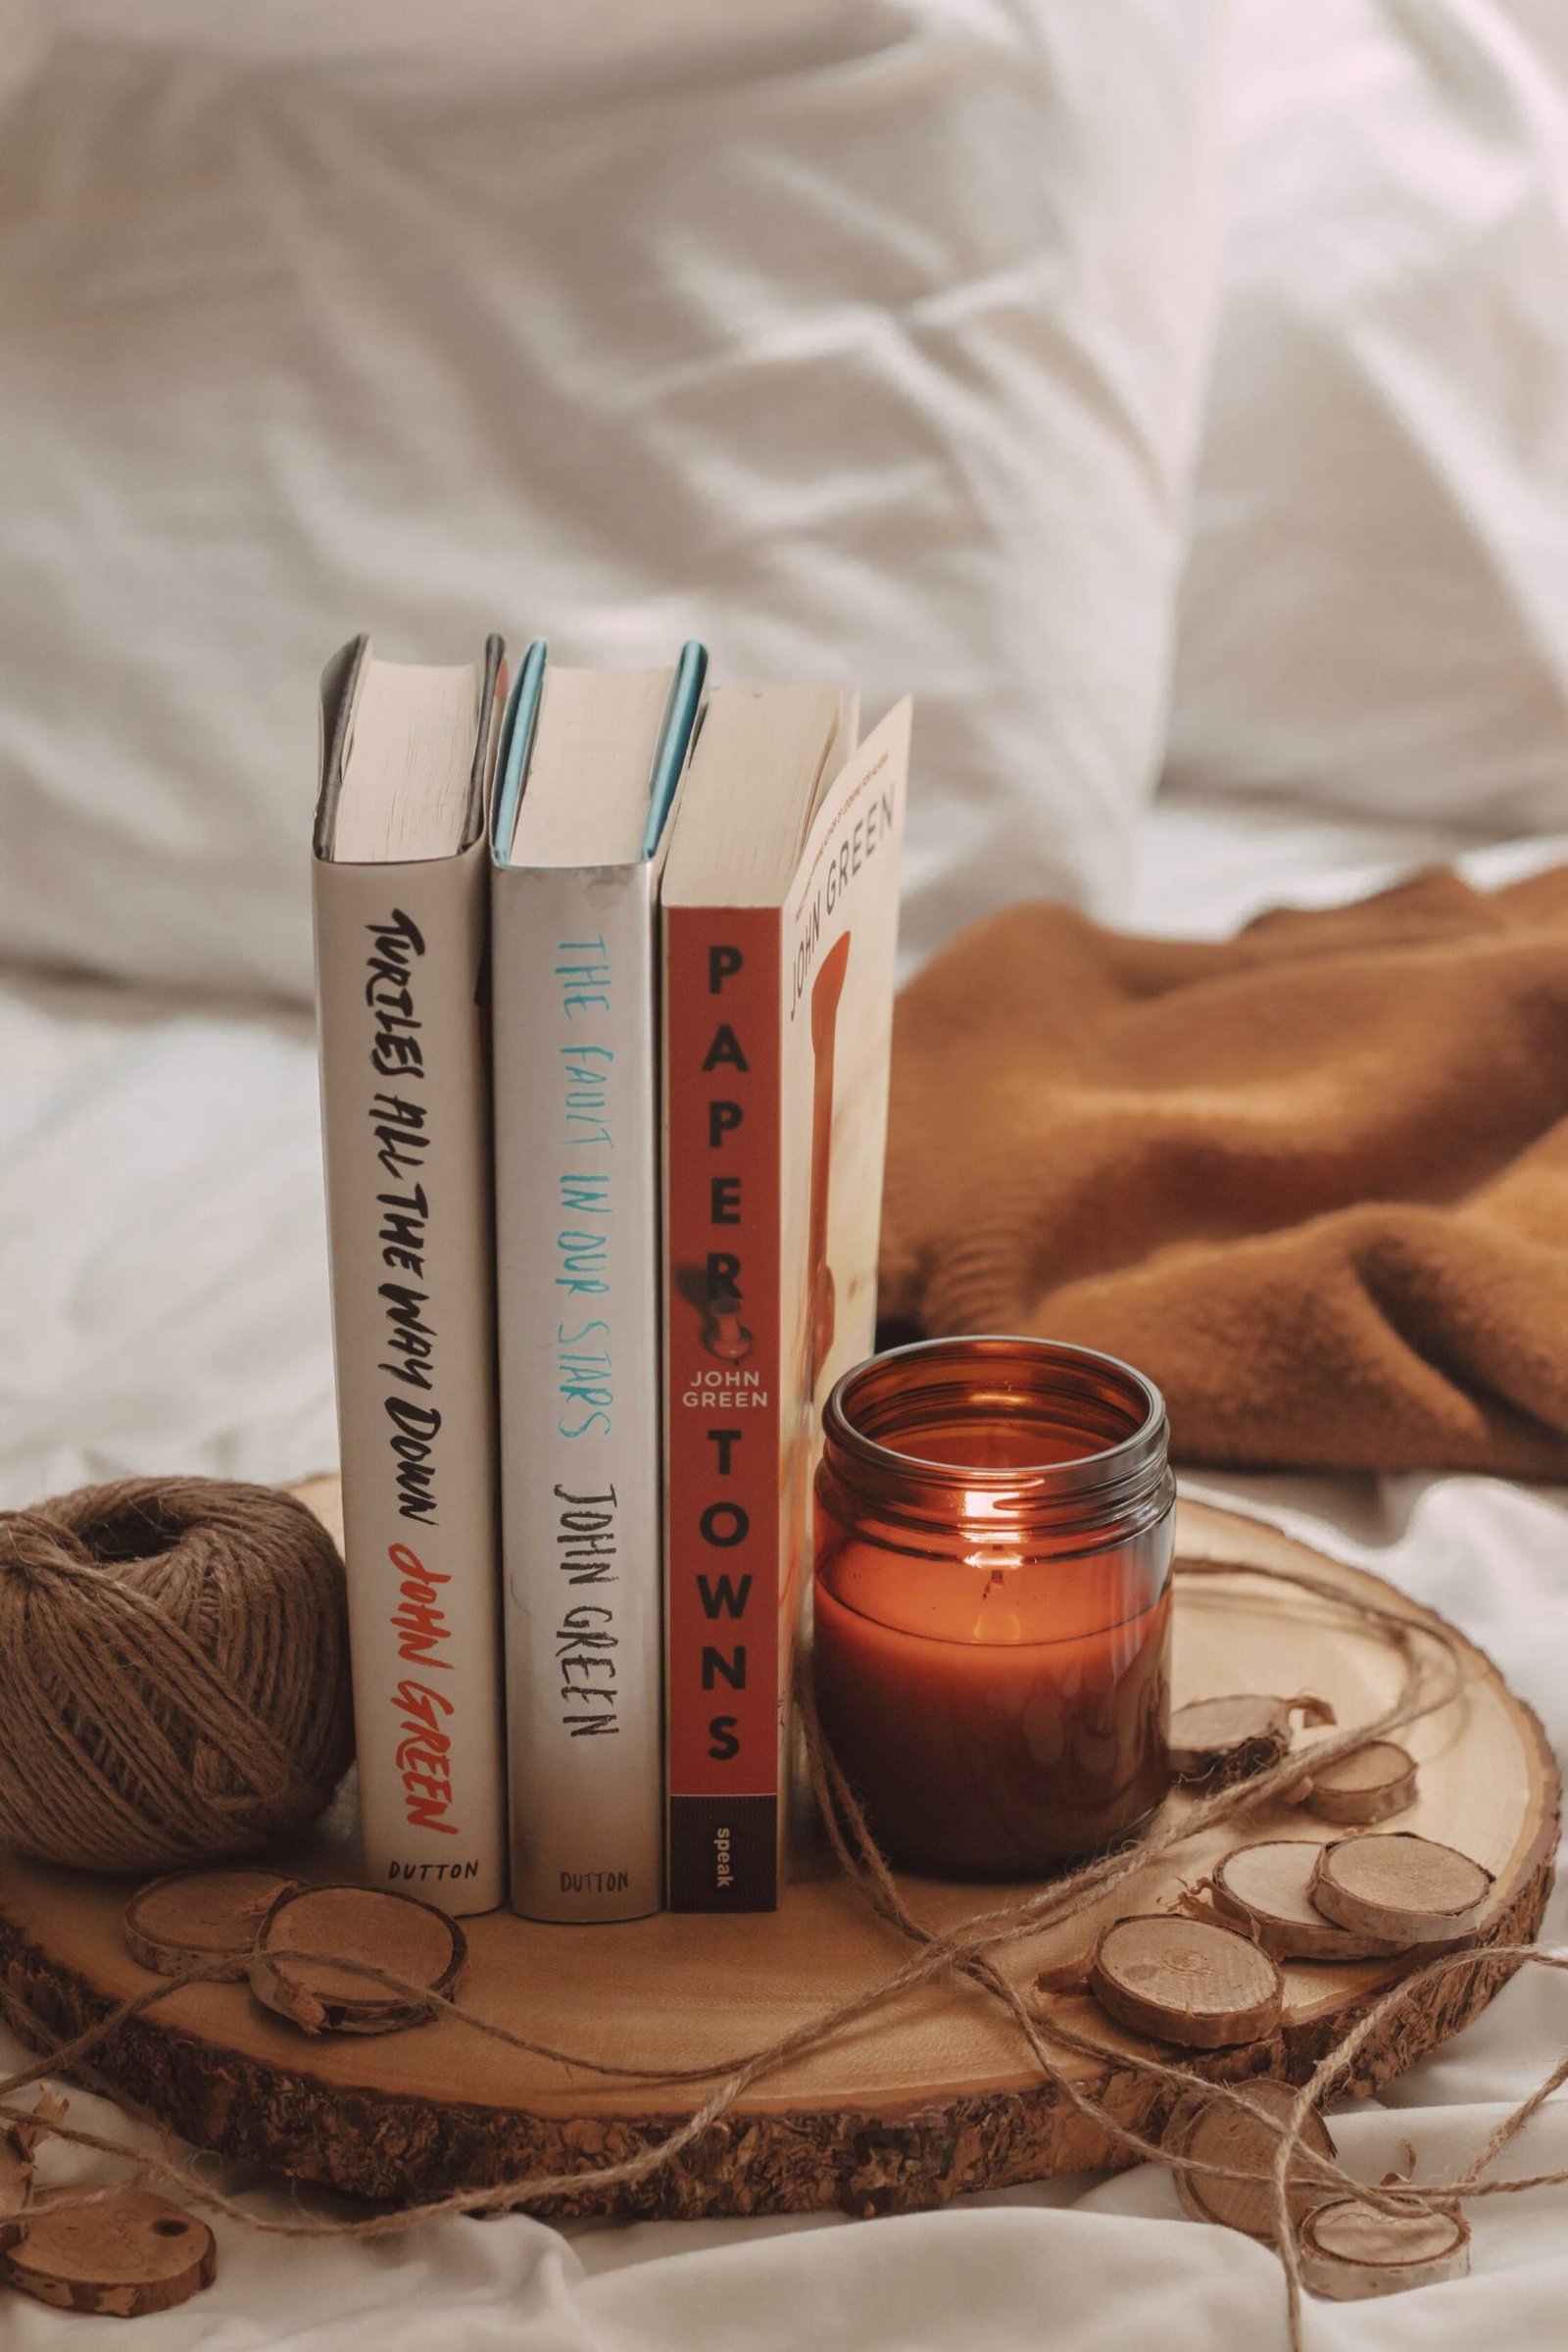 paper towns, the fault in our stars, and turtles all the way down books by john green in between a lit candle and a spool of twine